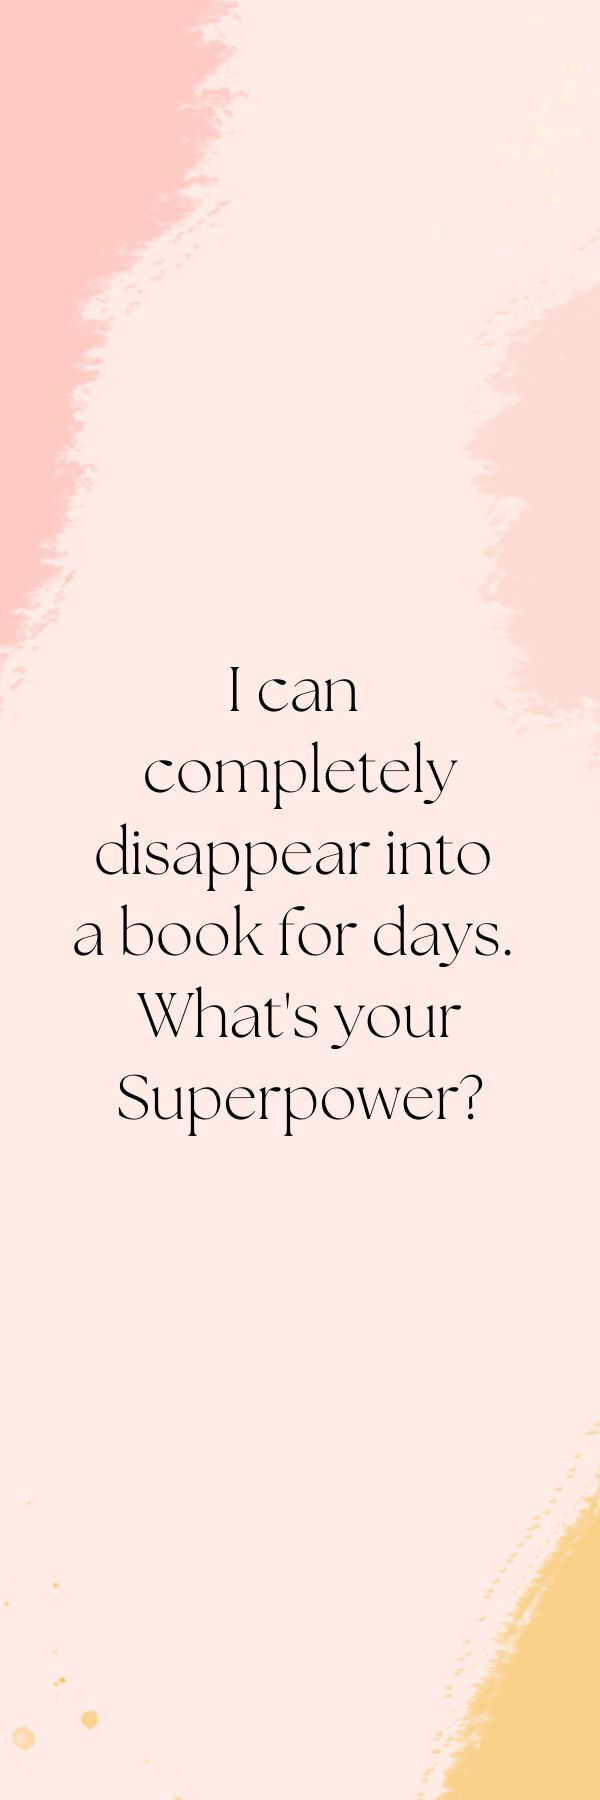 What's your Superpower?